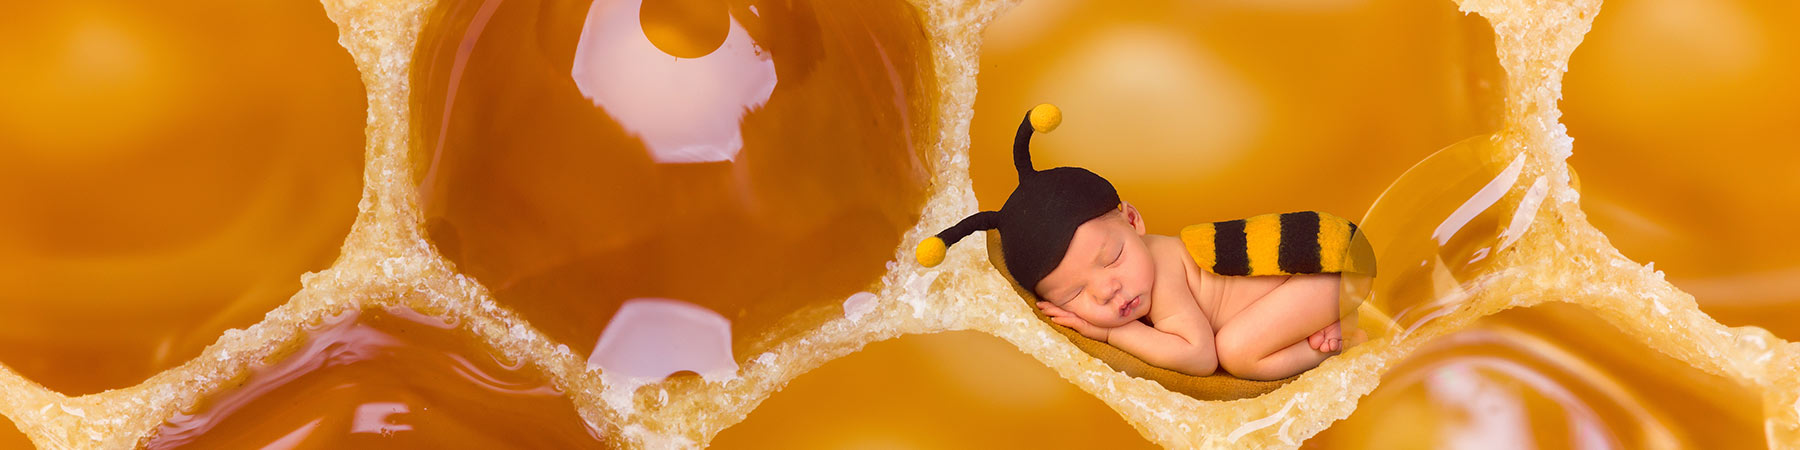 Baby in bee costume in a giant honey comb to represent that Manuka Honey Baby products such as soaps, baths and washes are a natural premium and gentle option